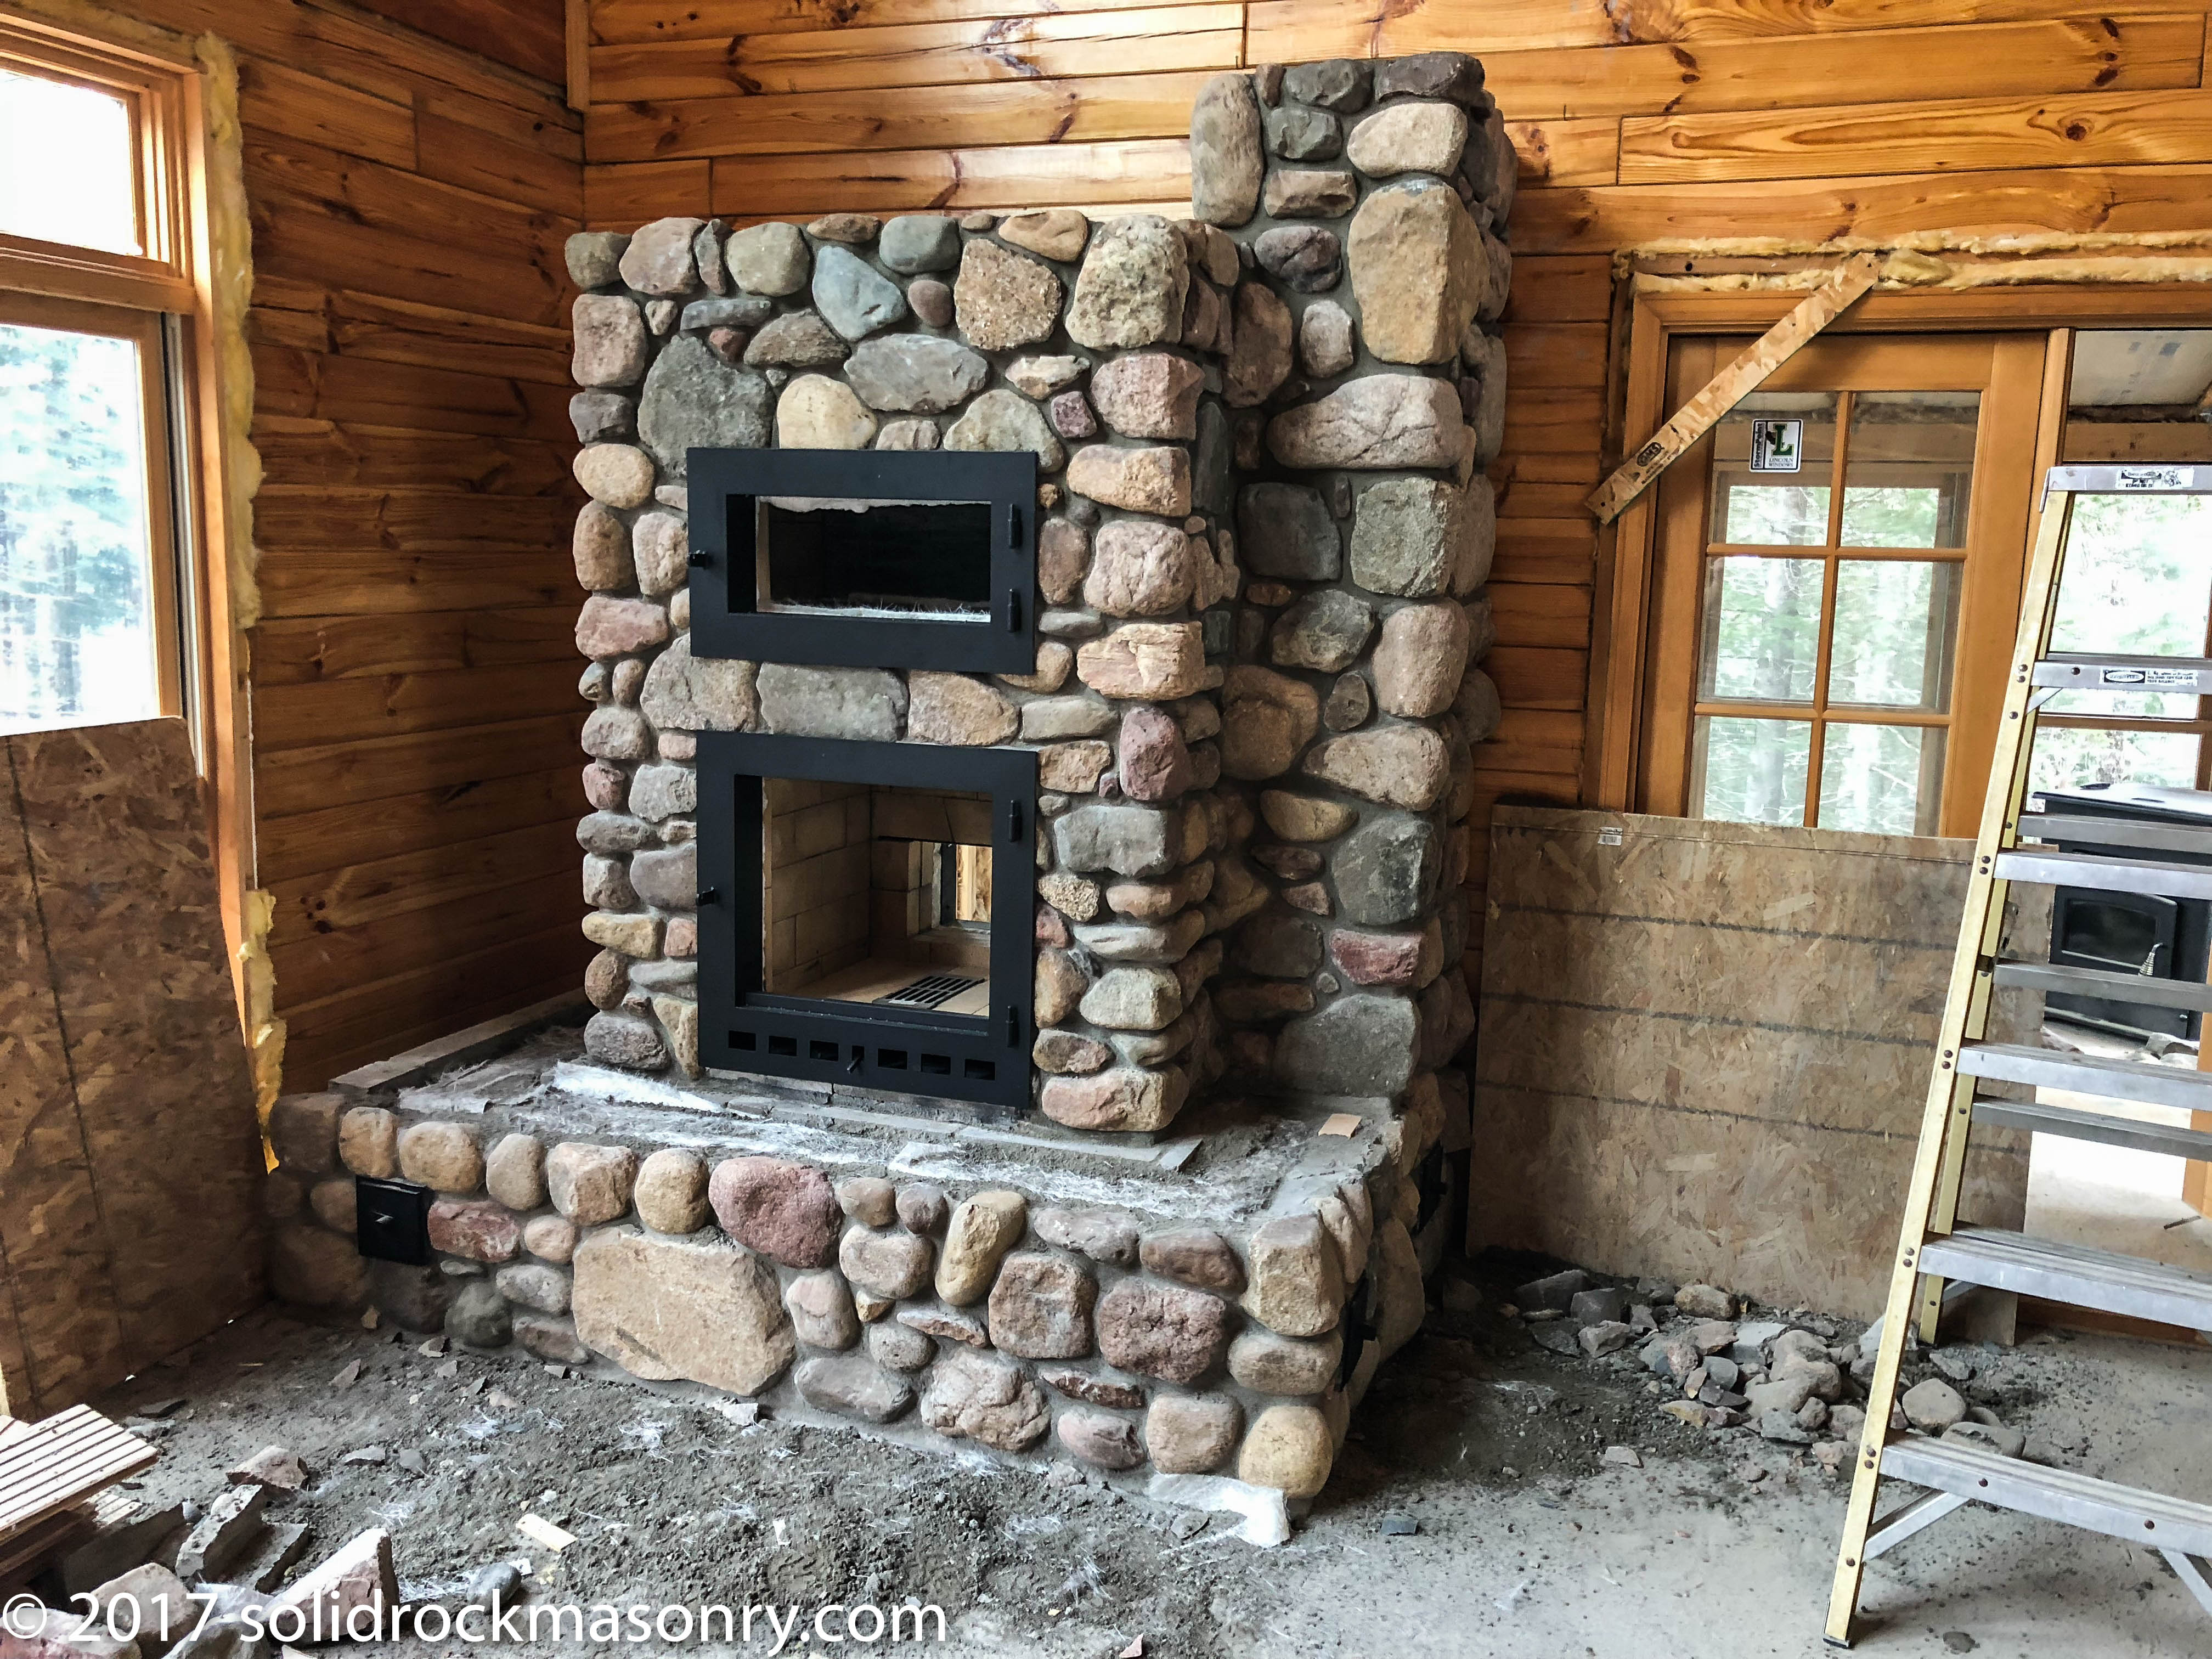 stone built fireplace for a stove and oven